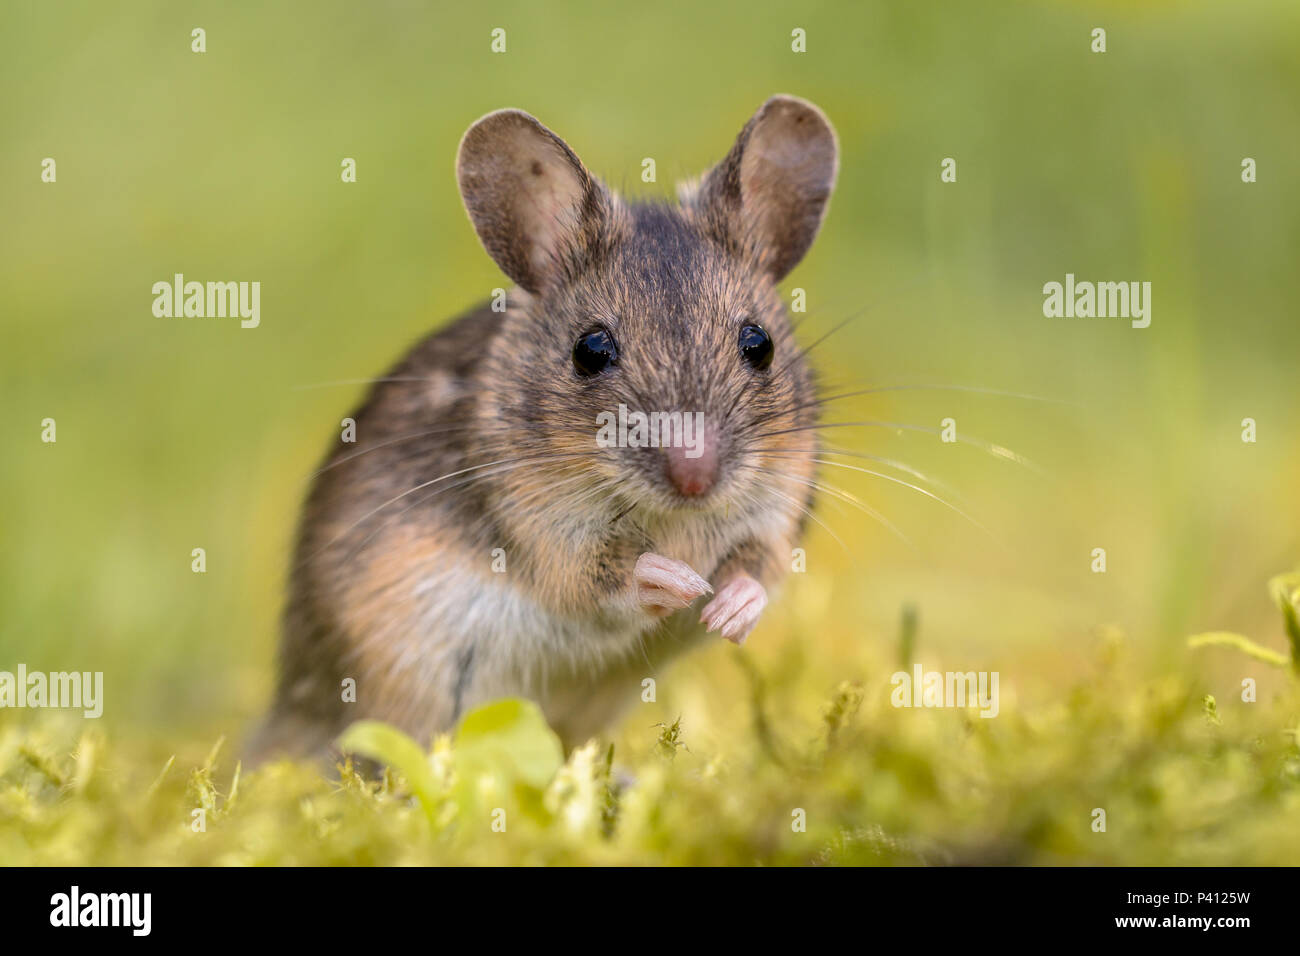 Adorable Wood mouse (Apodemus sylvaticus) on natural  green moss background and looking in the camera Stock Photo